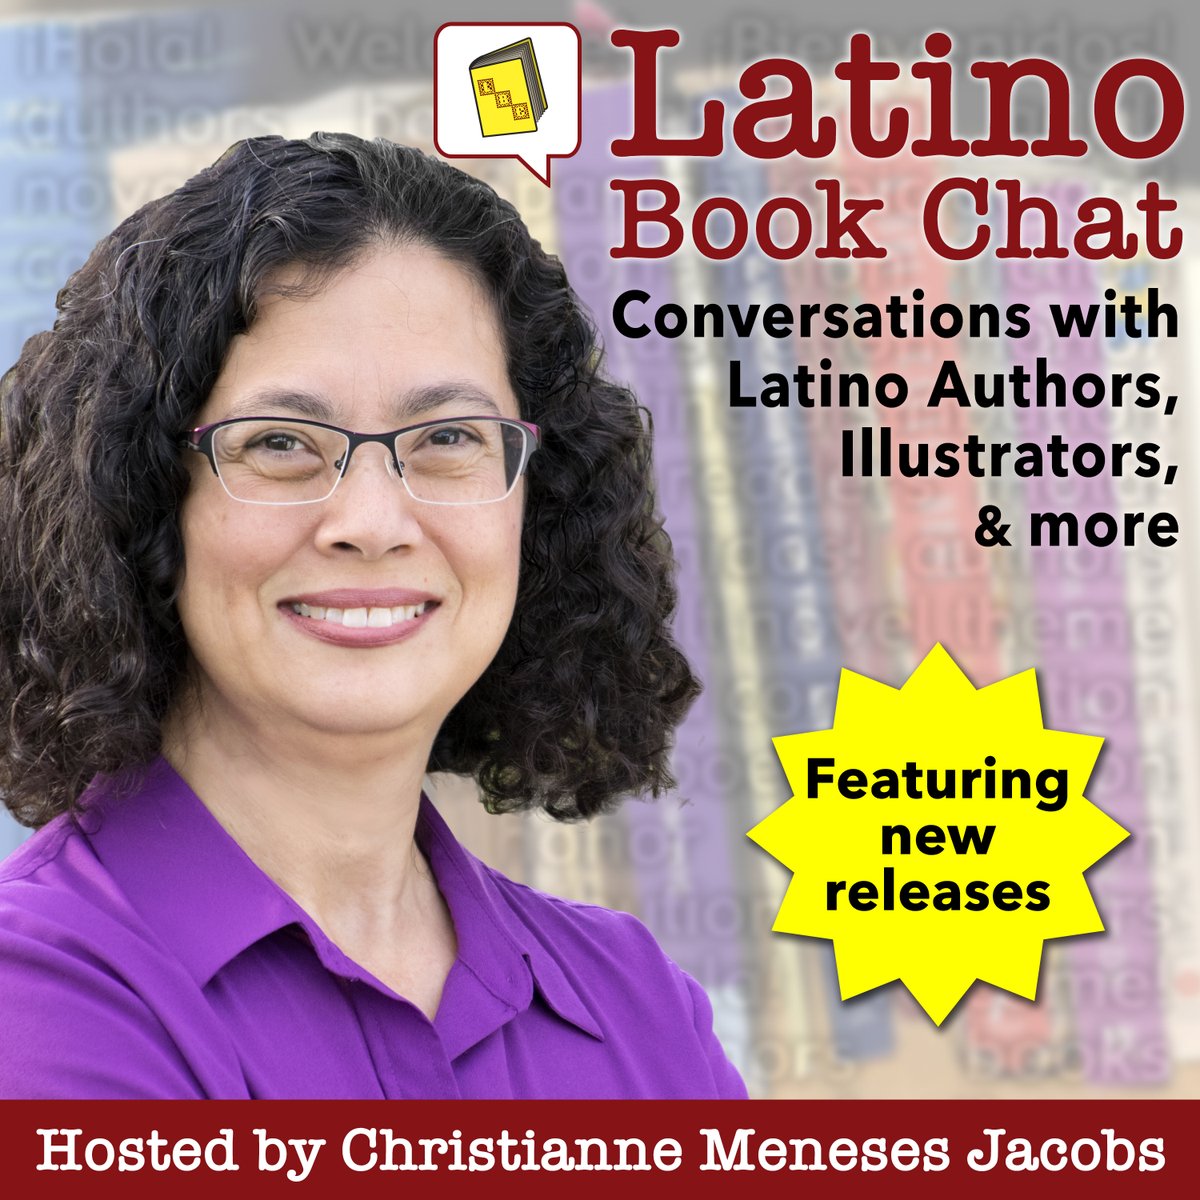 I am so excited to announce that Latino Book Chat is now part of the iHeart Radio Network. Please listen and support Latinix creators.

#latinobookchat #ReadLatinoLit #books #latinobooks #Latinos #LatinoHeritage #latinowriters #SupportLatinxLit #latinxbooks #childrensbooks